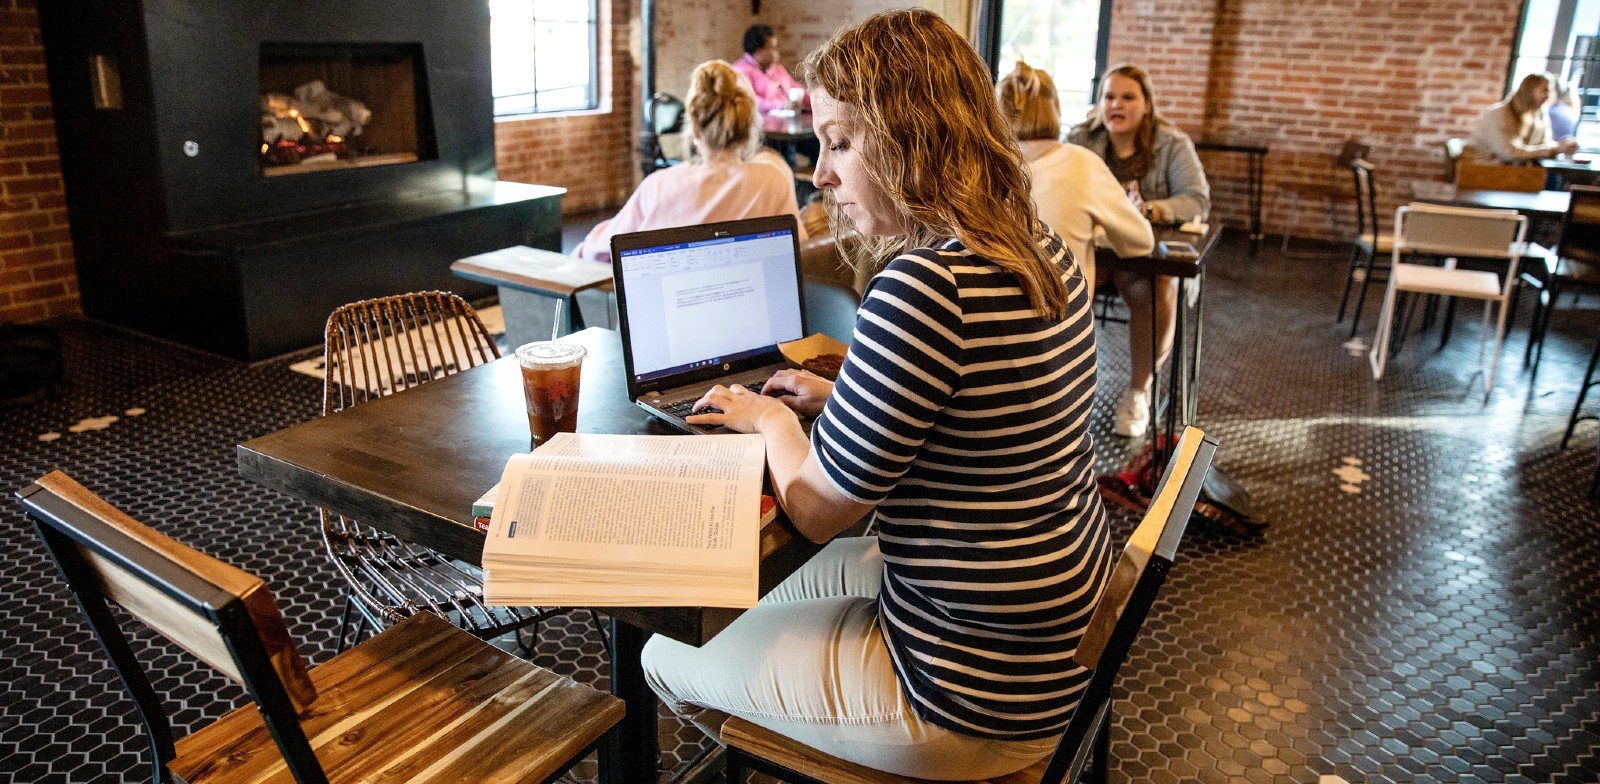 A graduate student works on a laptop in a coffee shop.